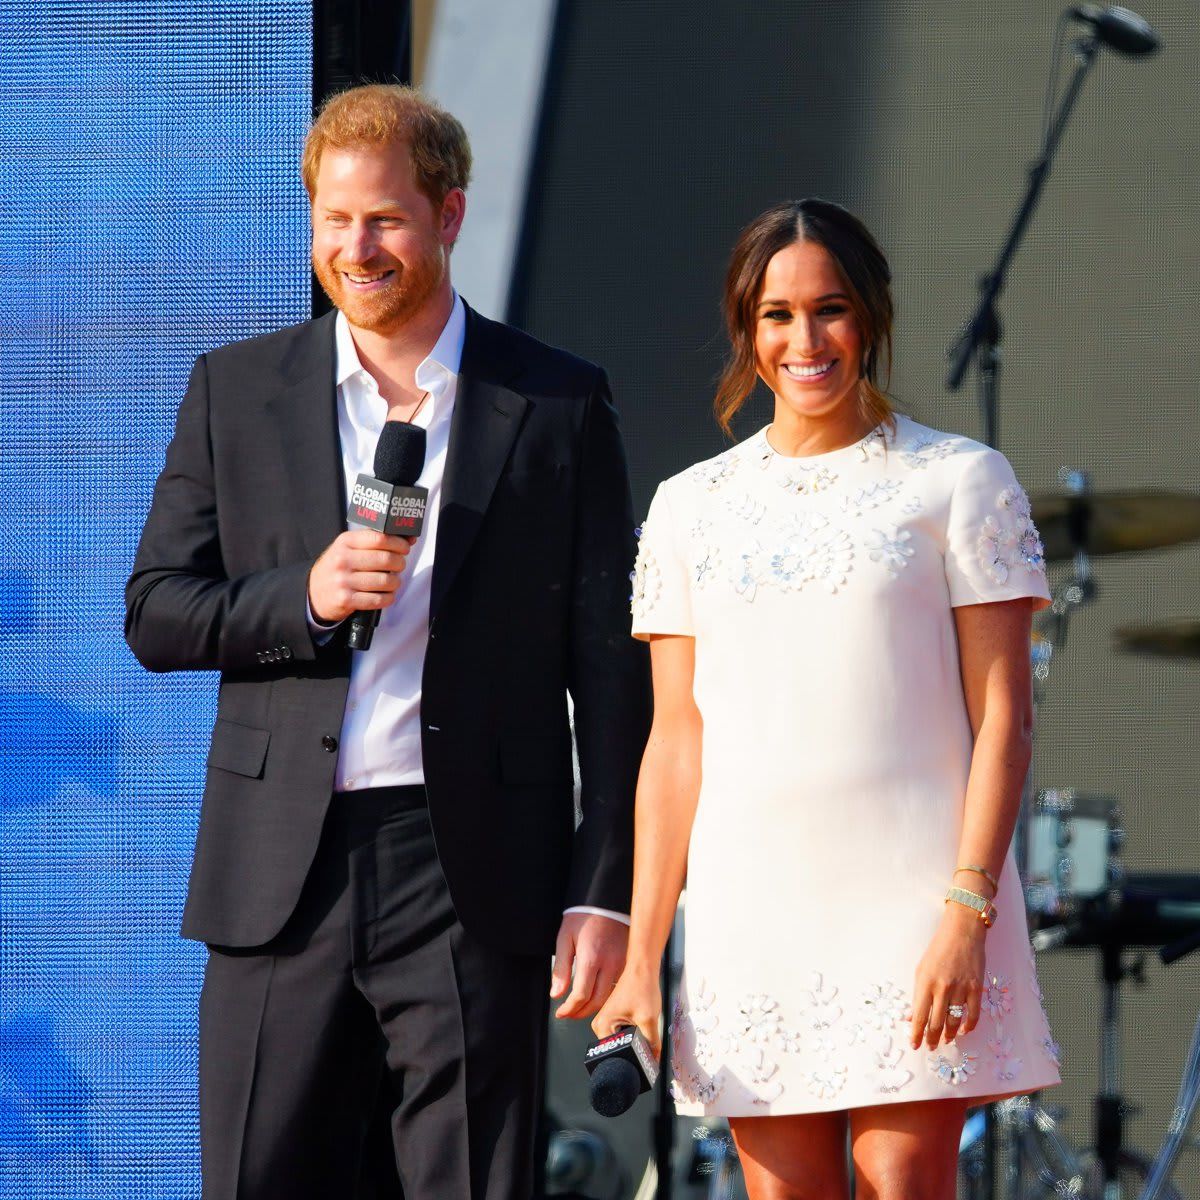 Meghan and Harry called for vaccine equity during their appearance at Global Citizen Live in September